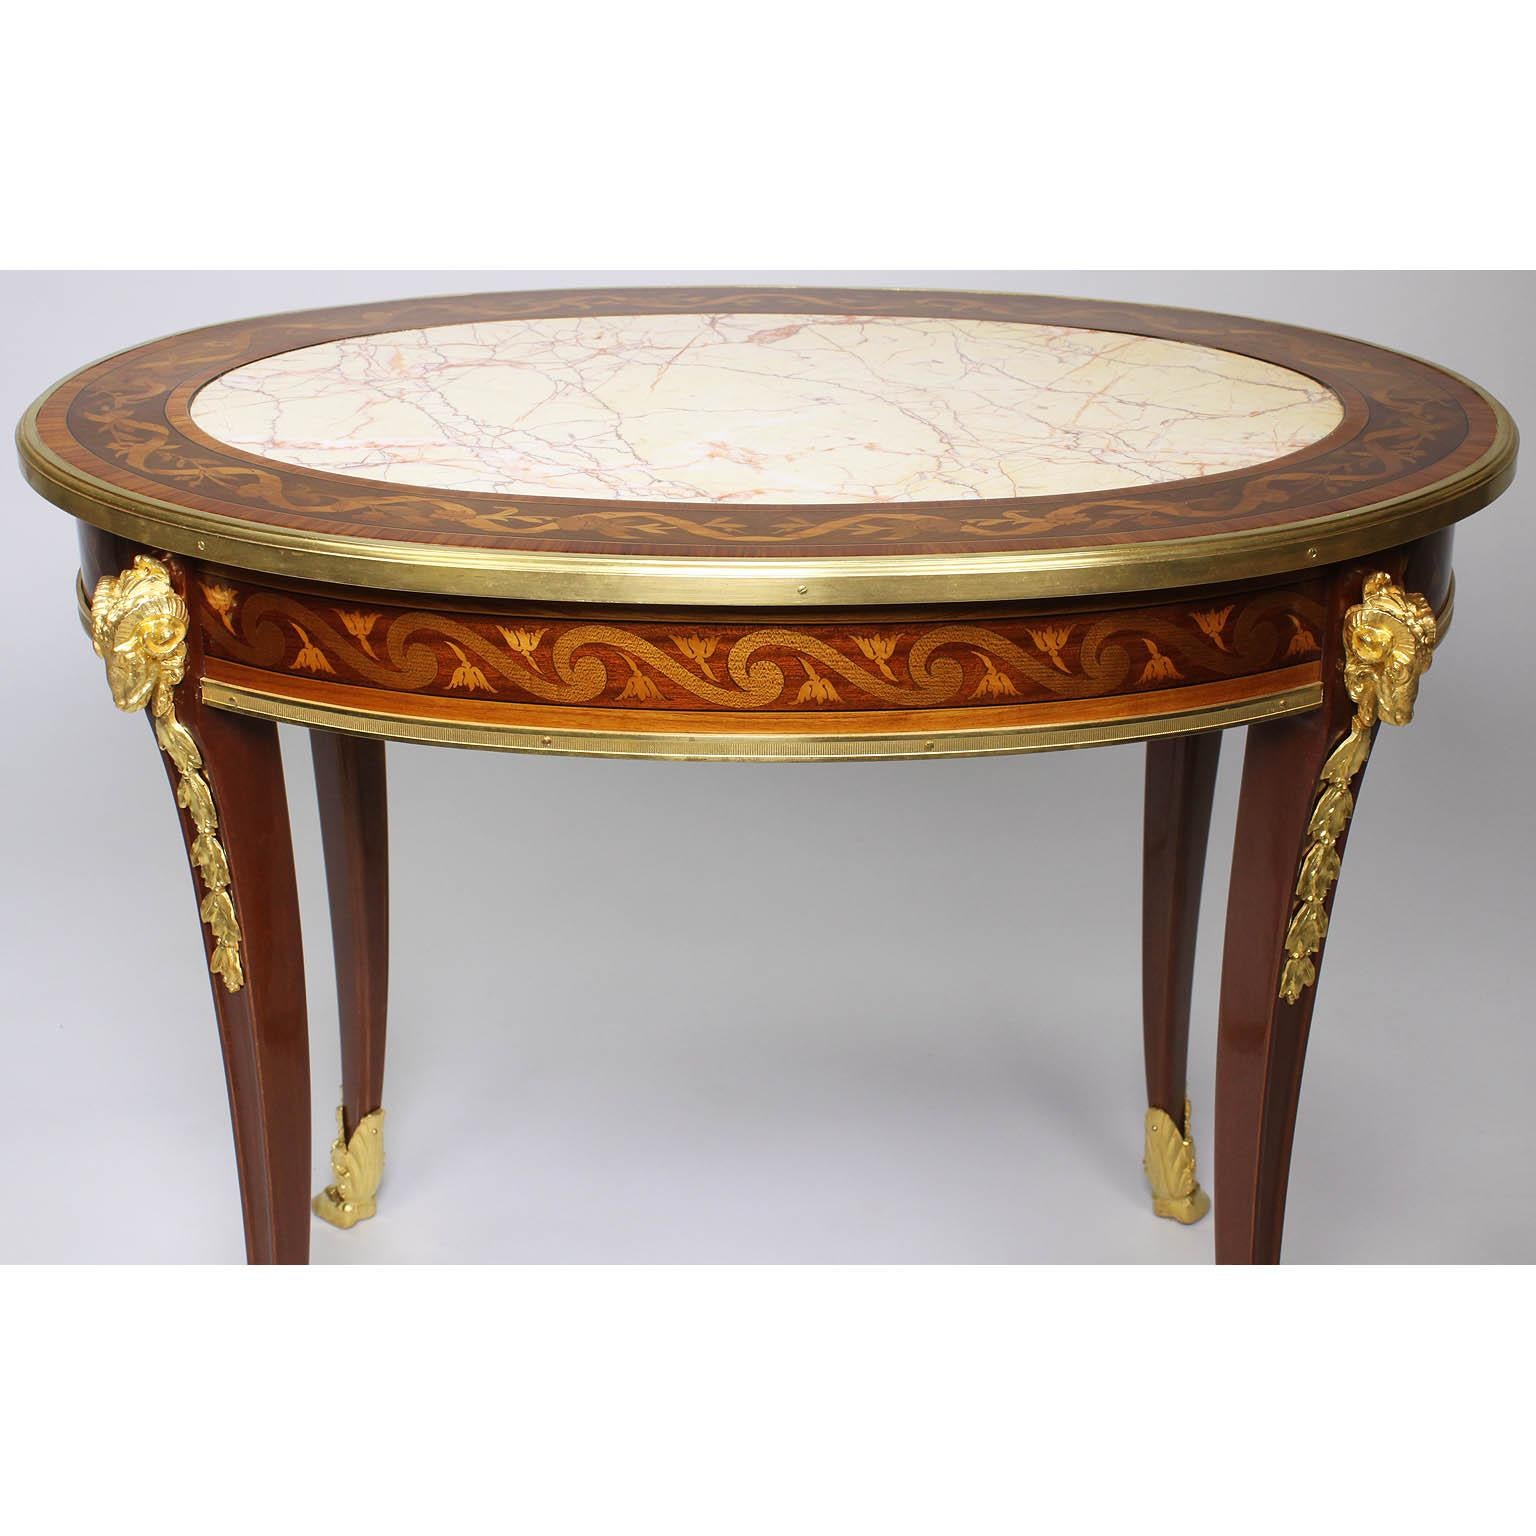 Early 20th Century French Louis XV Style Belle Époque Marquetry Coffee Table, Manner of F. Linke